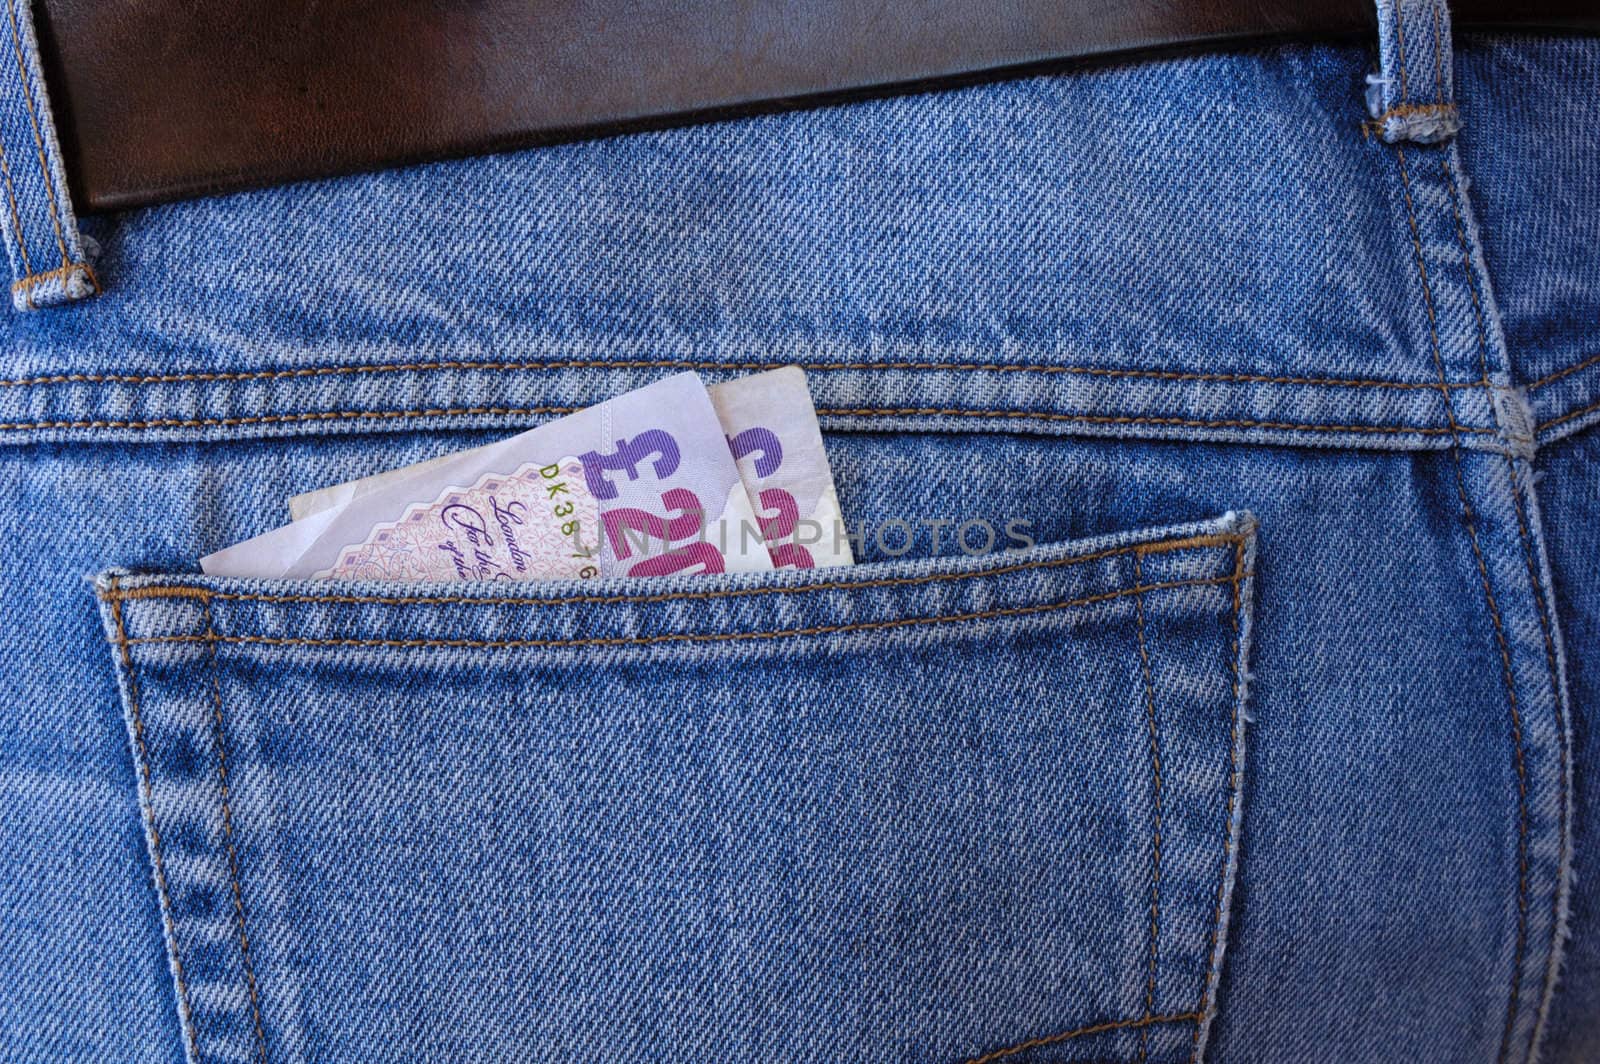 Two 20-pound notes poke out of the rear pocket of someone's jeans. A temptation for a pickpocket.